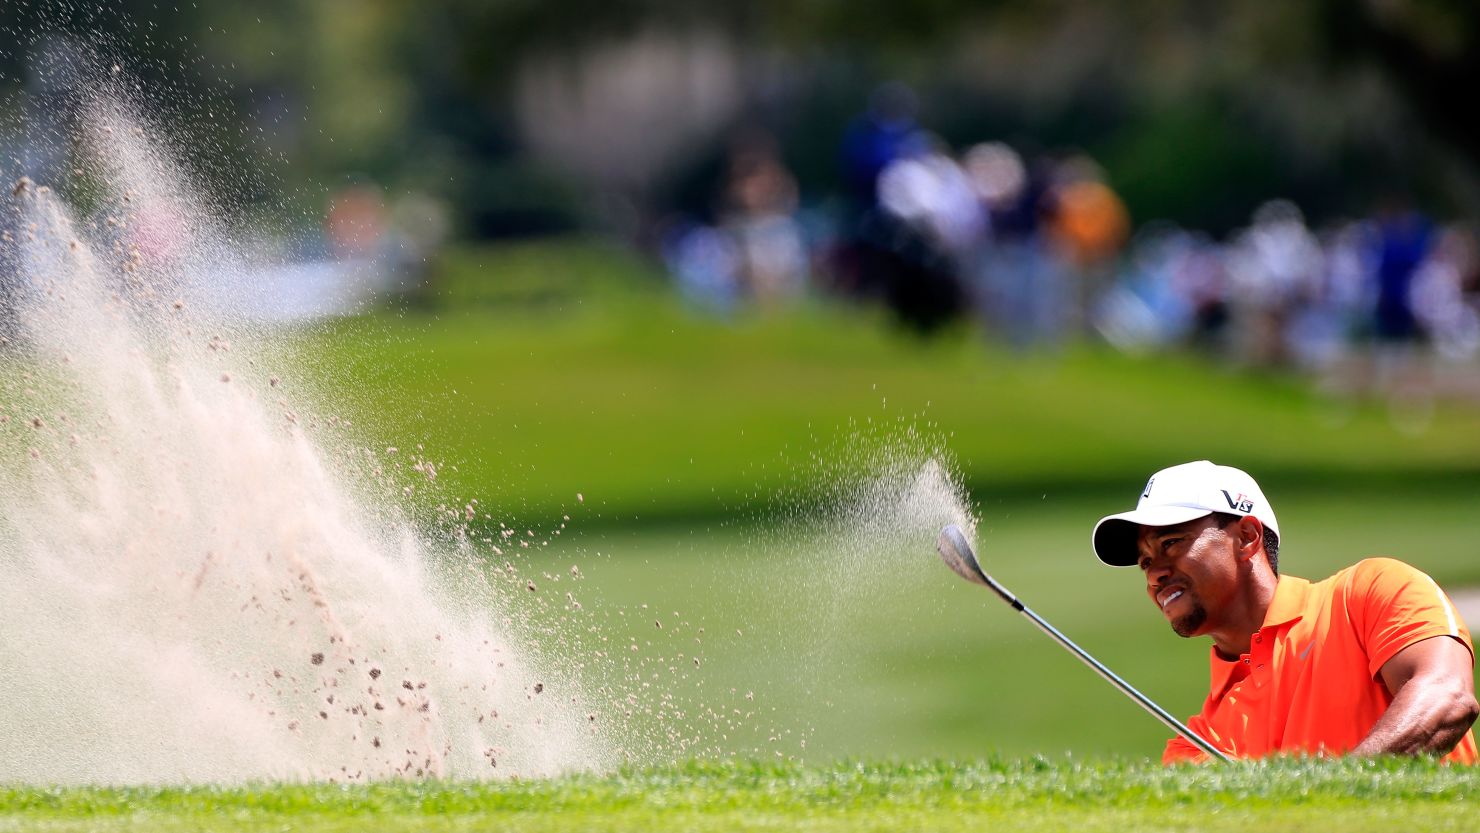 Defending champion Tiger Woods plays a bunker shot during the second round of the Arnold Palmer Invitational on Friday.